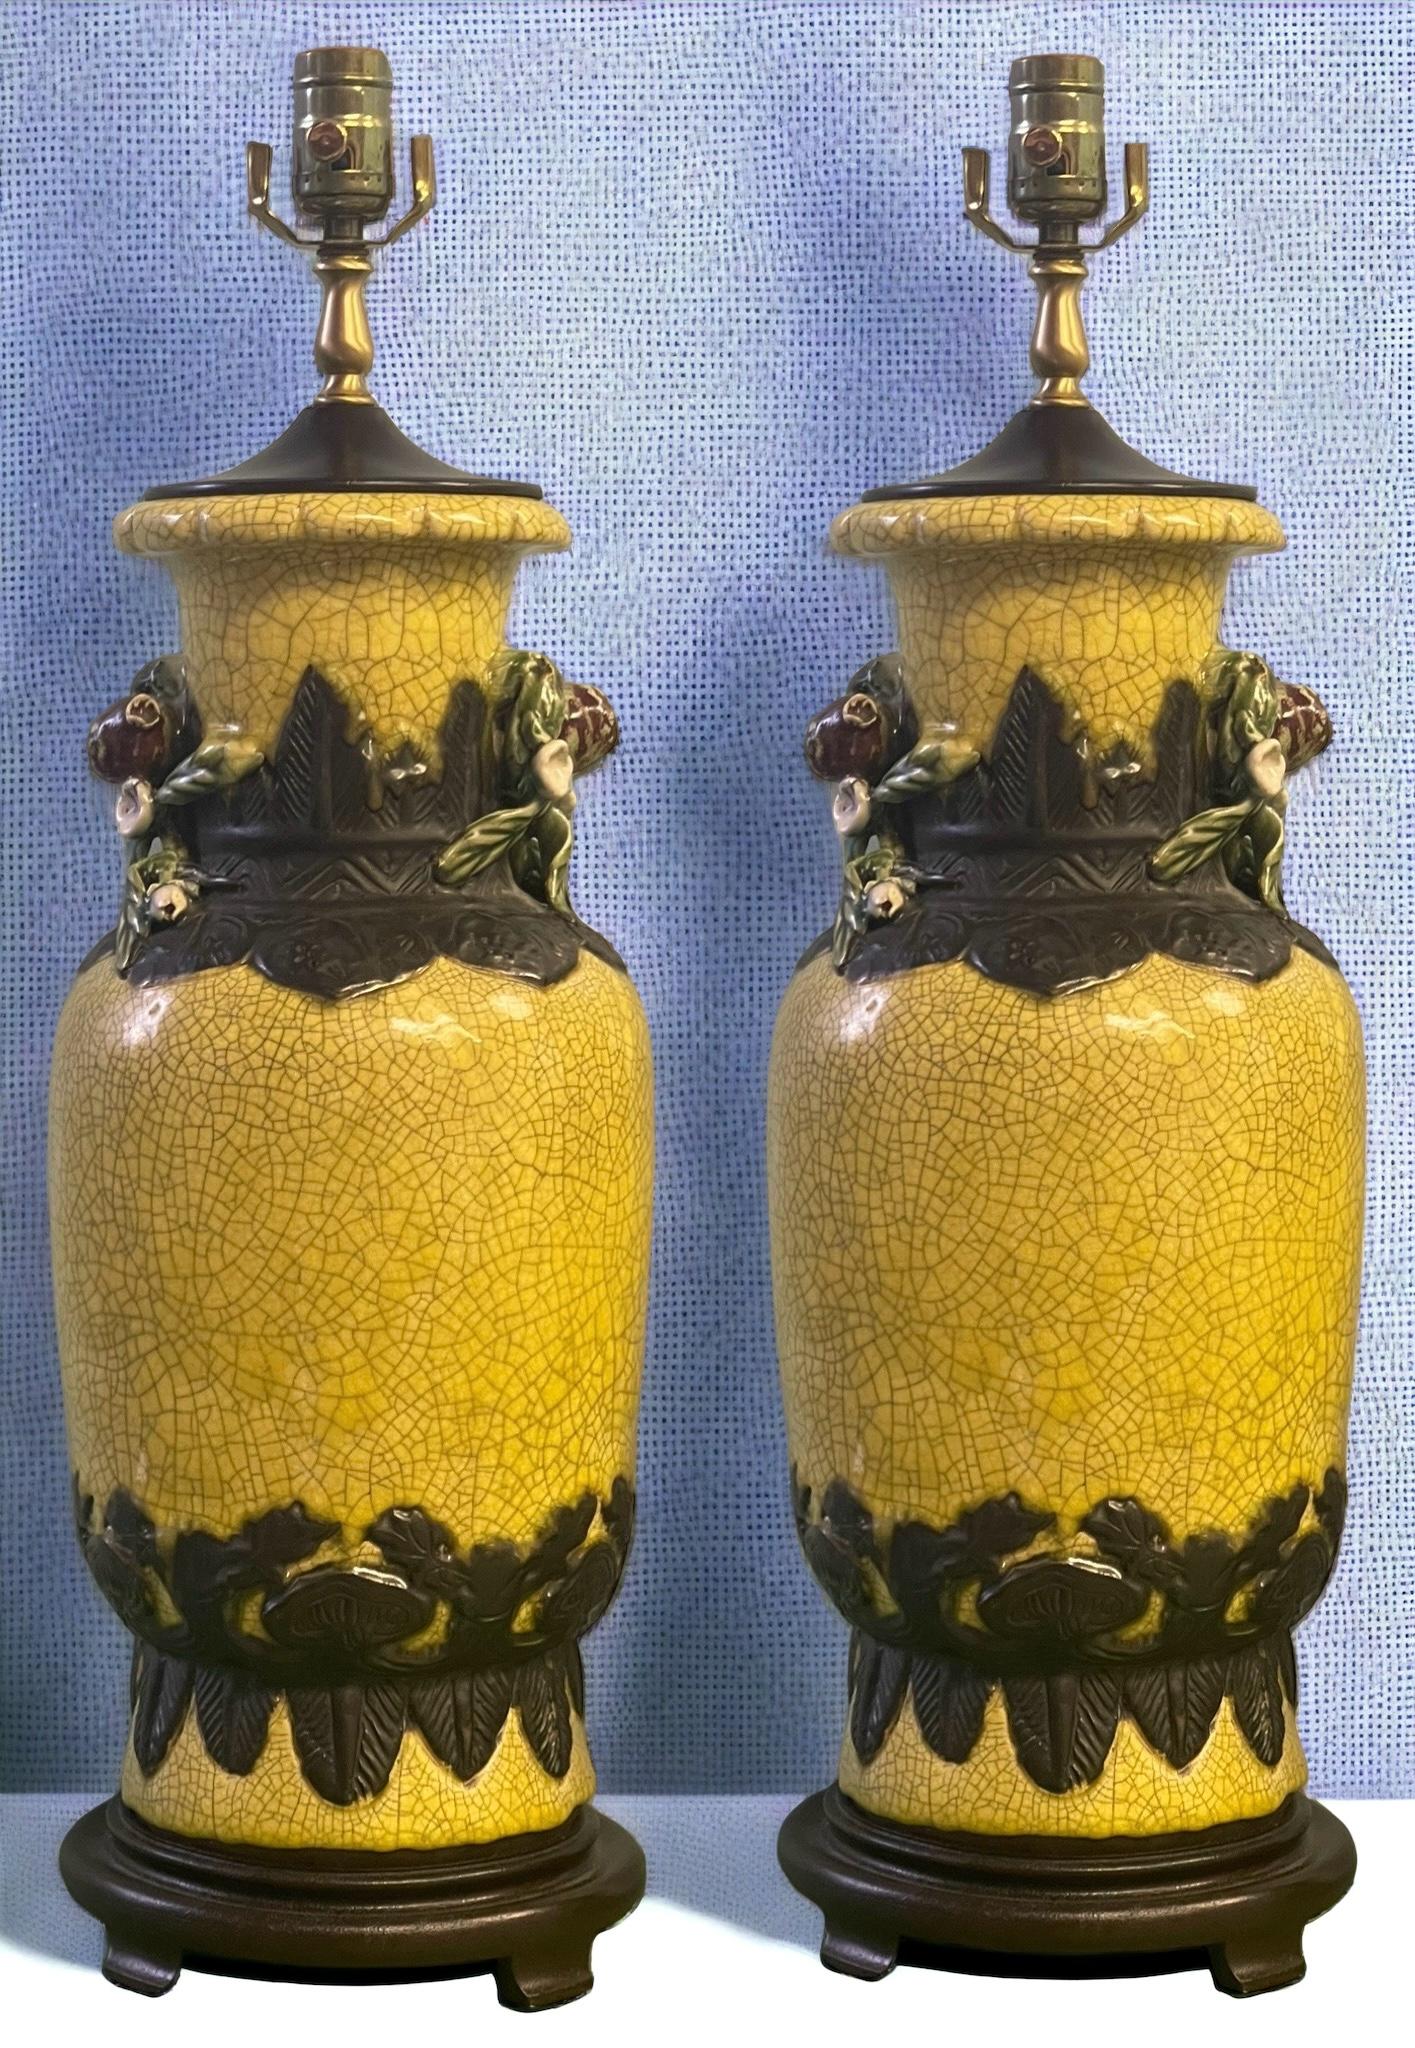 20th Century Chinese Export Style Jar / Vase Form Crackle Glaze Table Lamps W/ Fruit - Pair For Sale